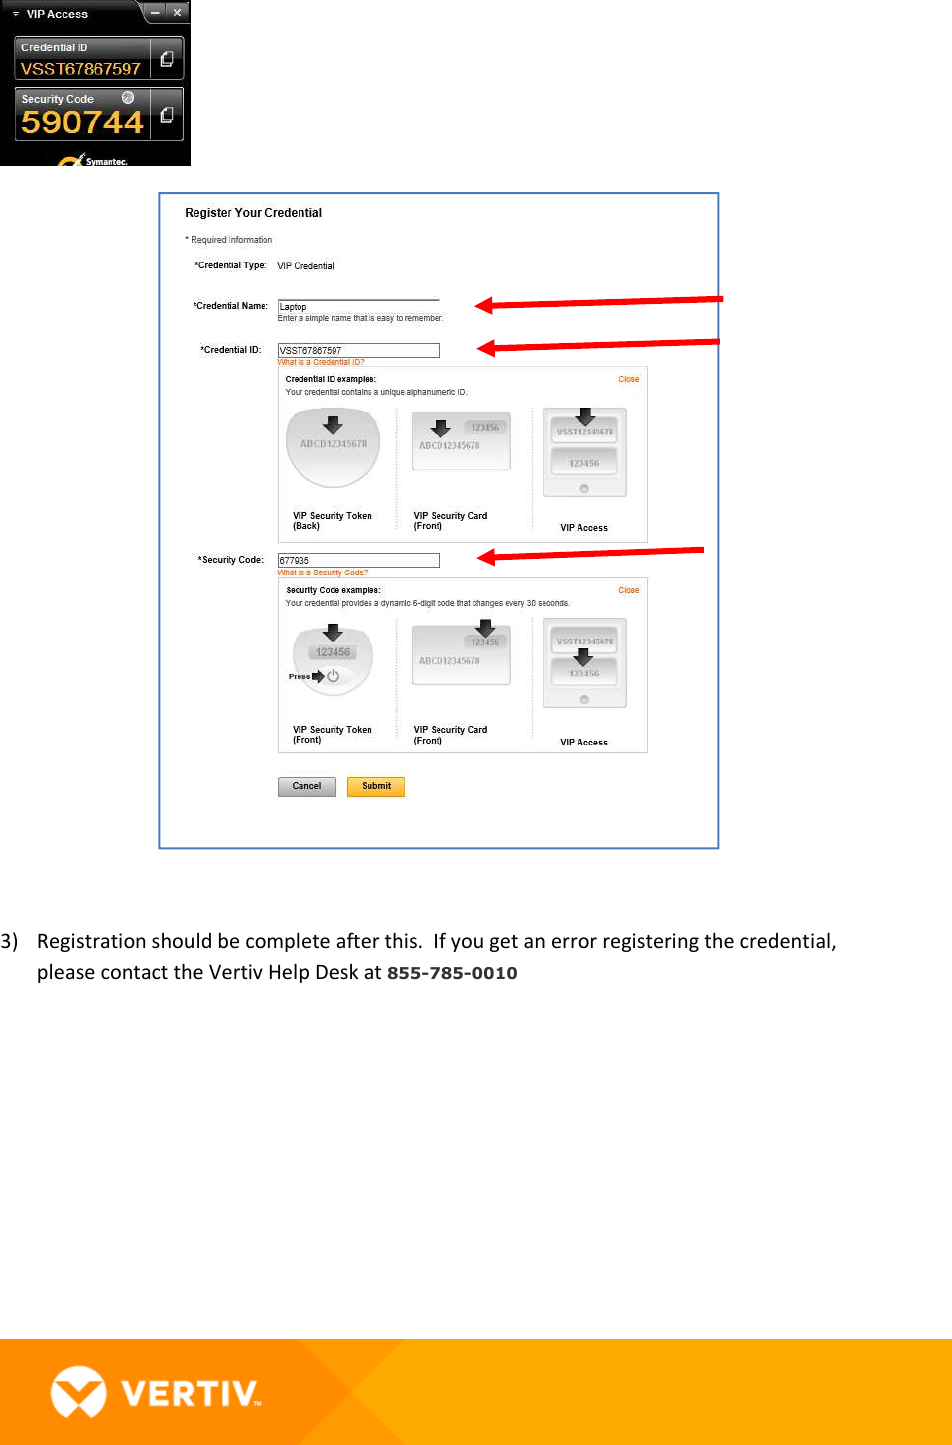 Page 5 of 8 - Vertiv Employee Remote Access And VIP End User Guide-Verizon Guide